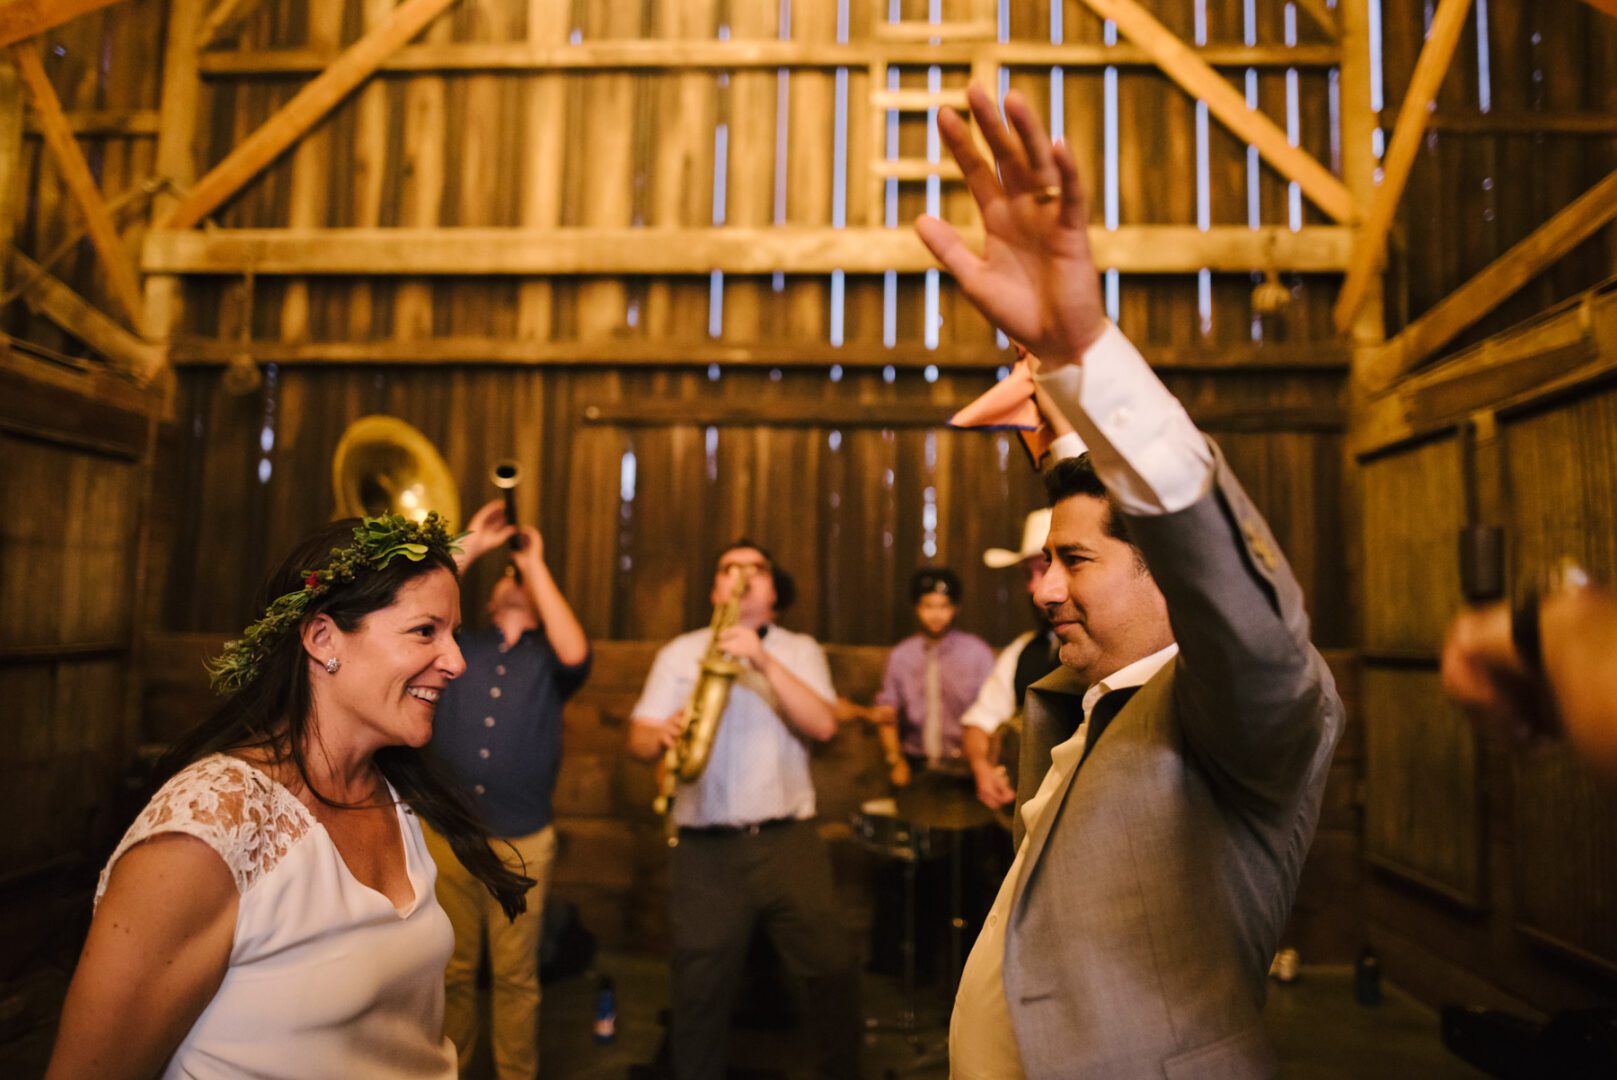 A bride and groom dancing in a barn.